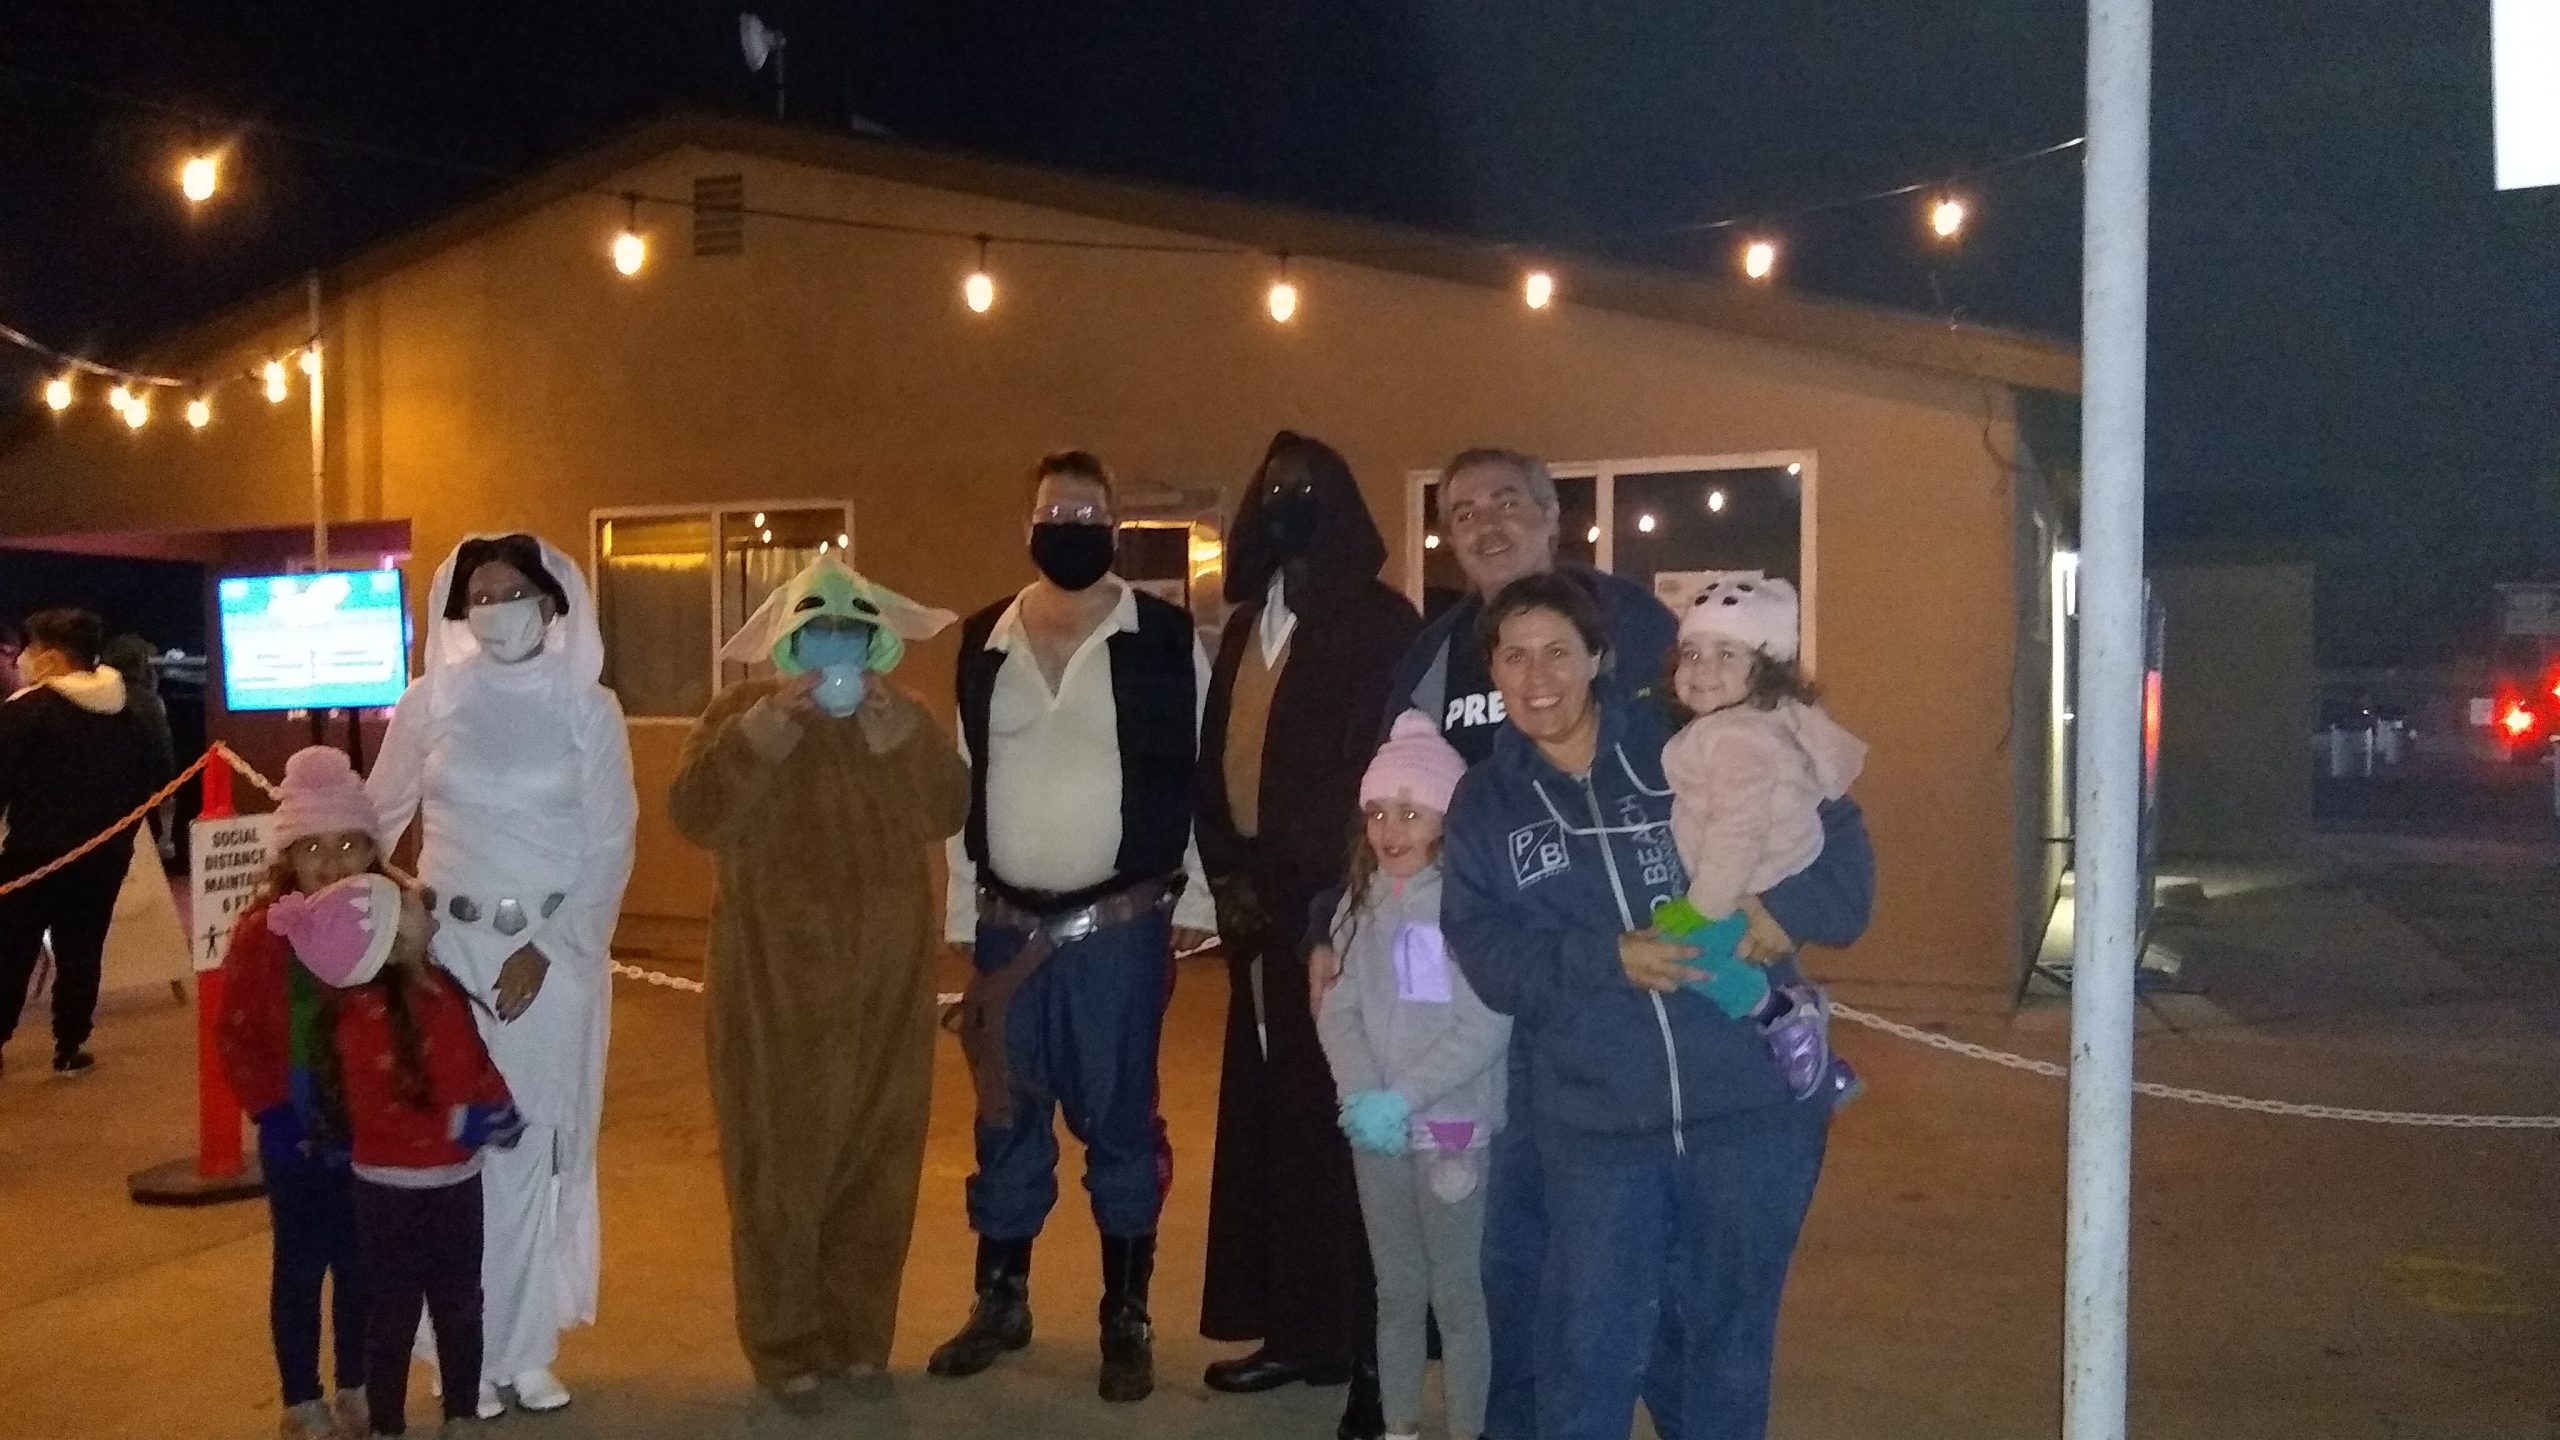 Cosplayers take a picture with my family. Return of the Jedi drive in.